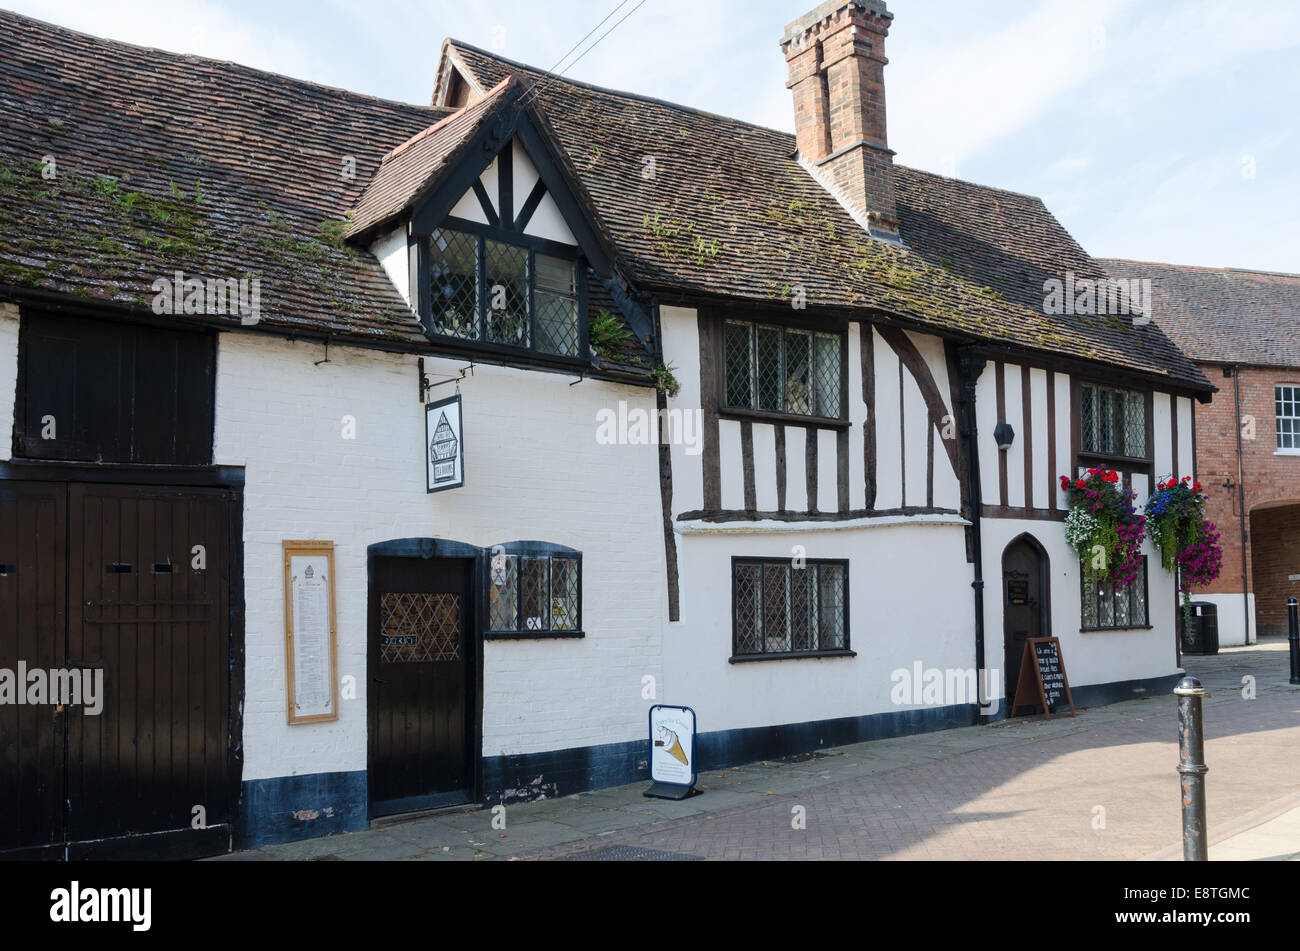 Oken Thomas tea rooms and cafe in Castle Street, Warwick Stock Photo